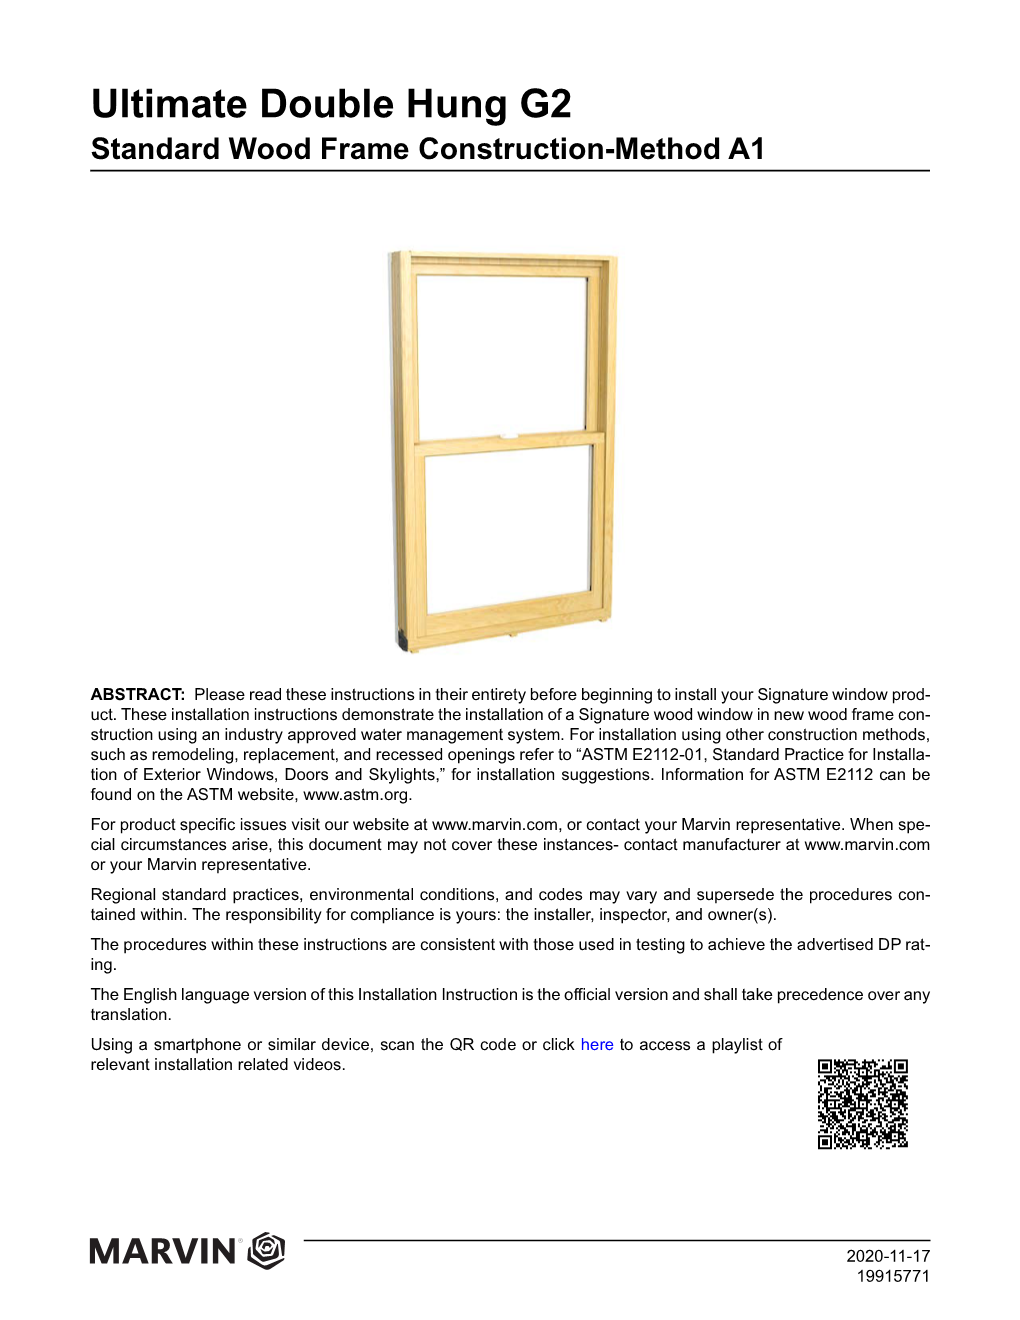 Ultimate Double Hung G2 Standard Wood Frame Construction-Method A1